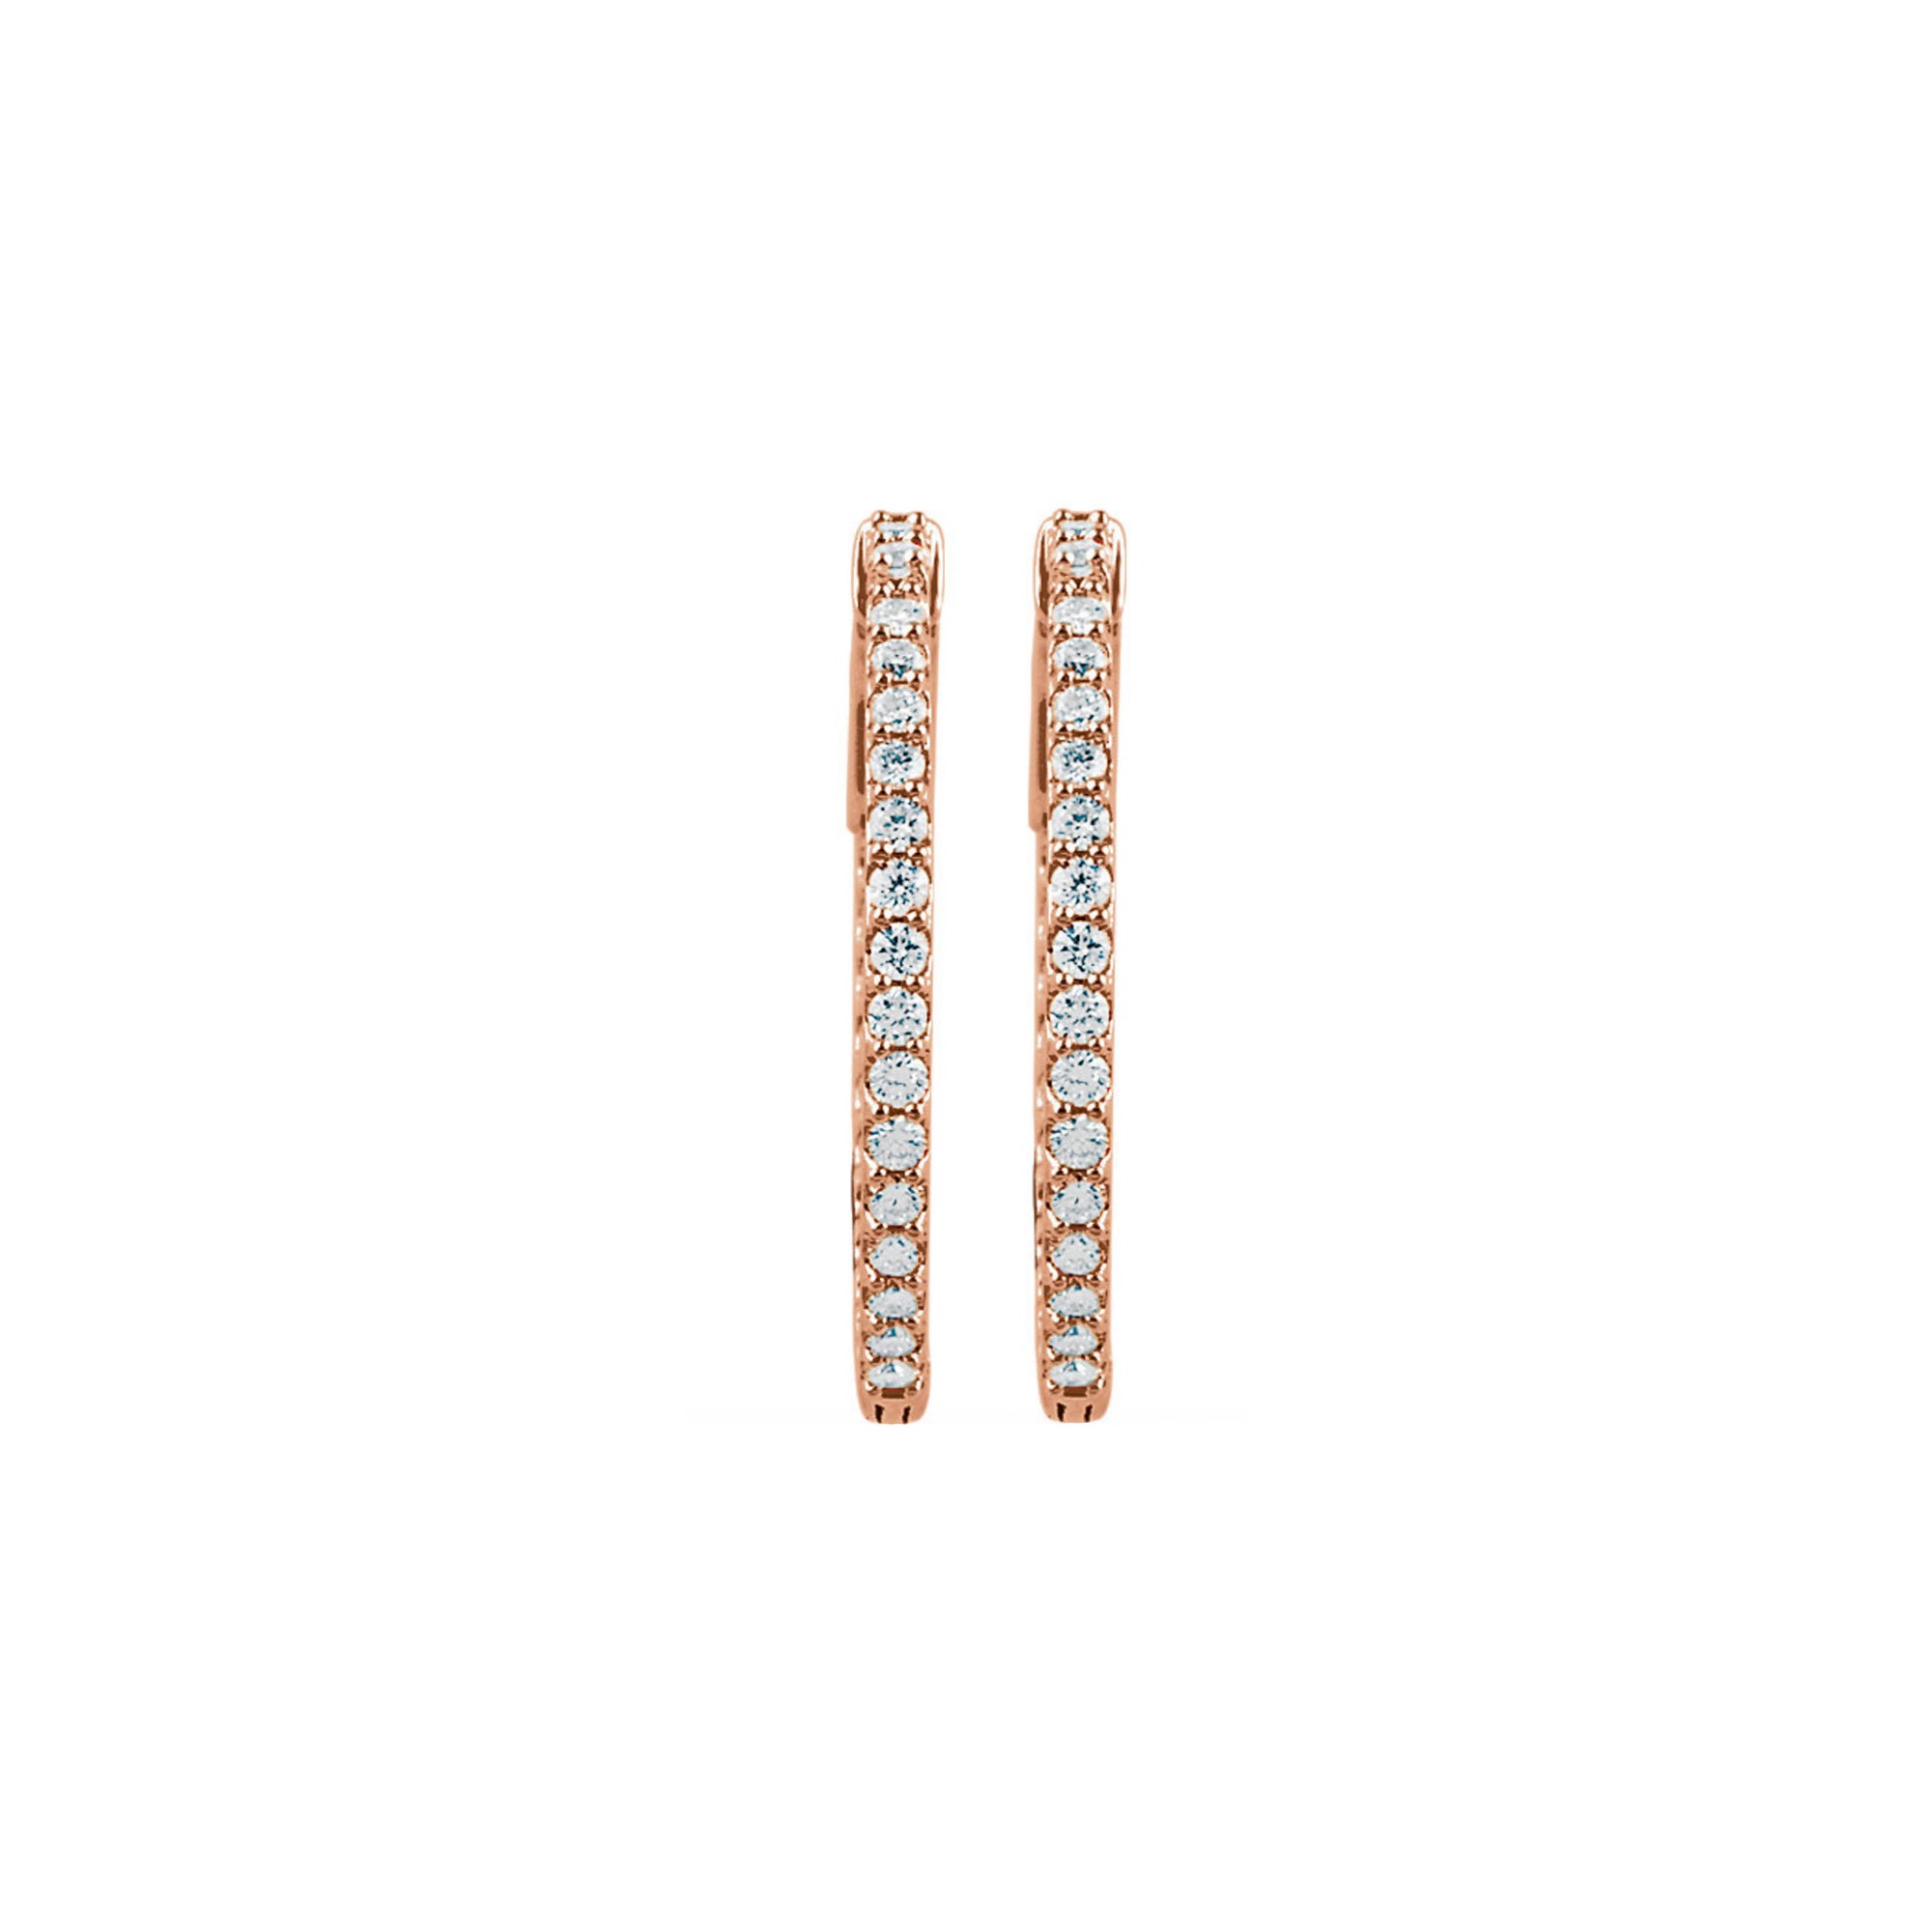 Diamond Earring Hoops, 5.00 Carat Total Weight in 14k White, Yellow or Rose Gold - Talisman Collection Fine Jewelers